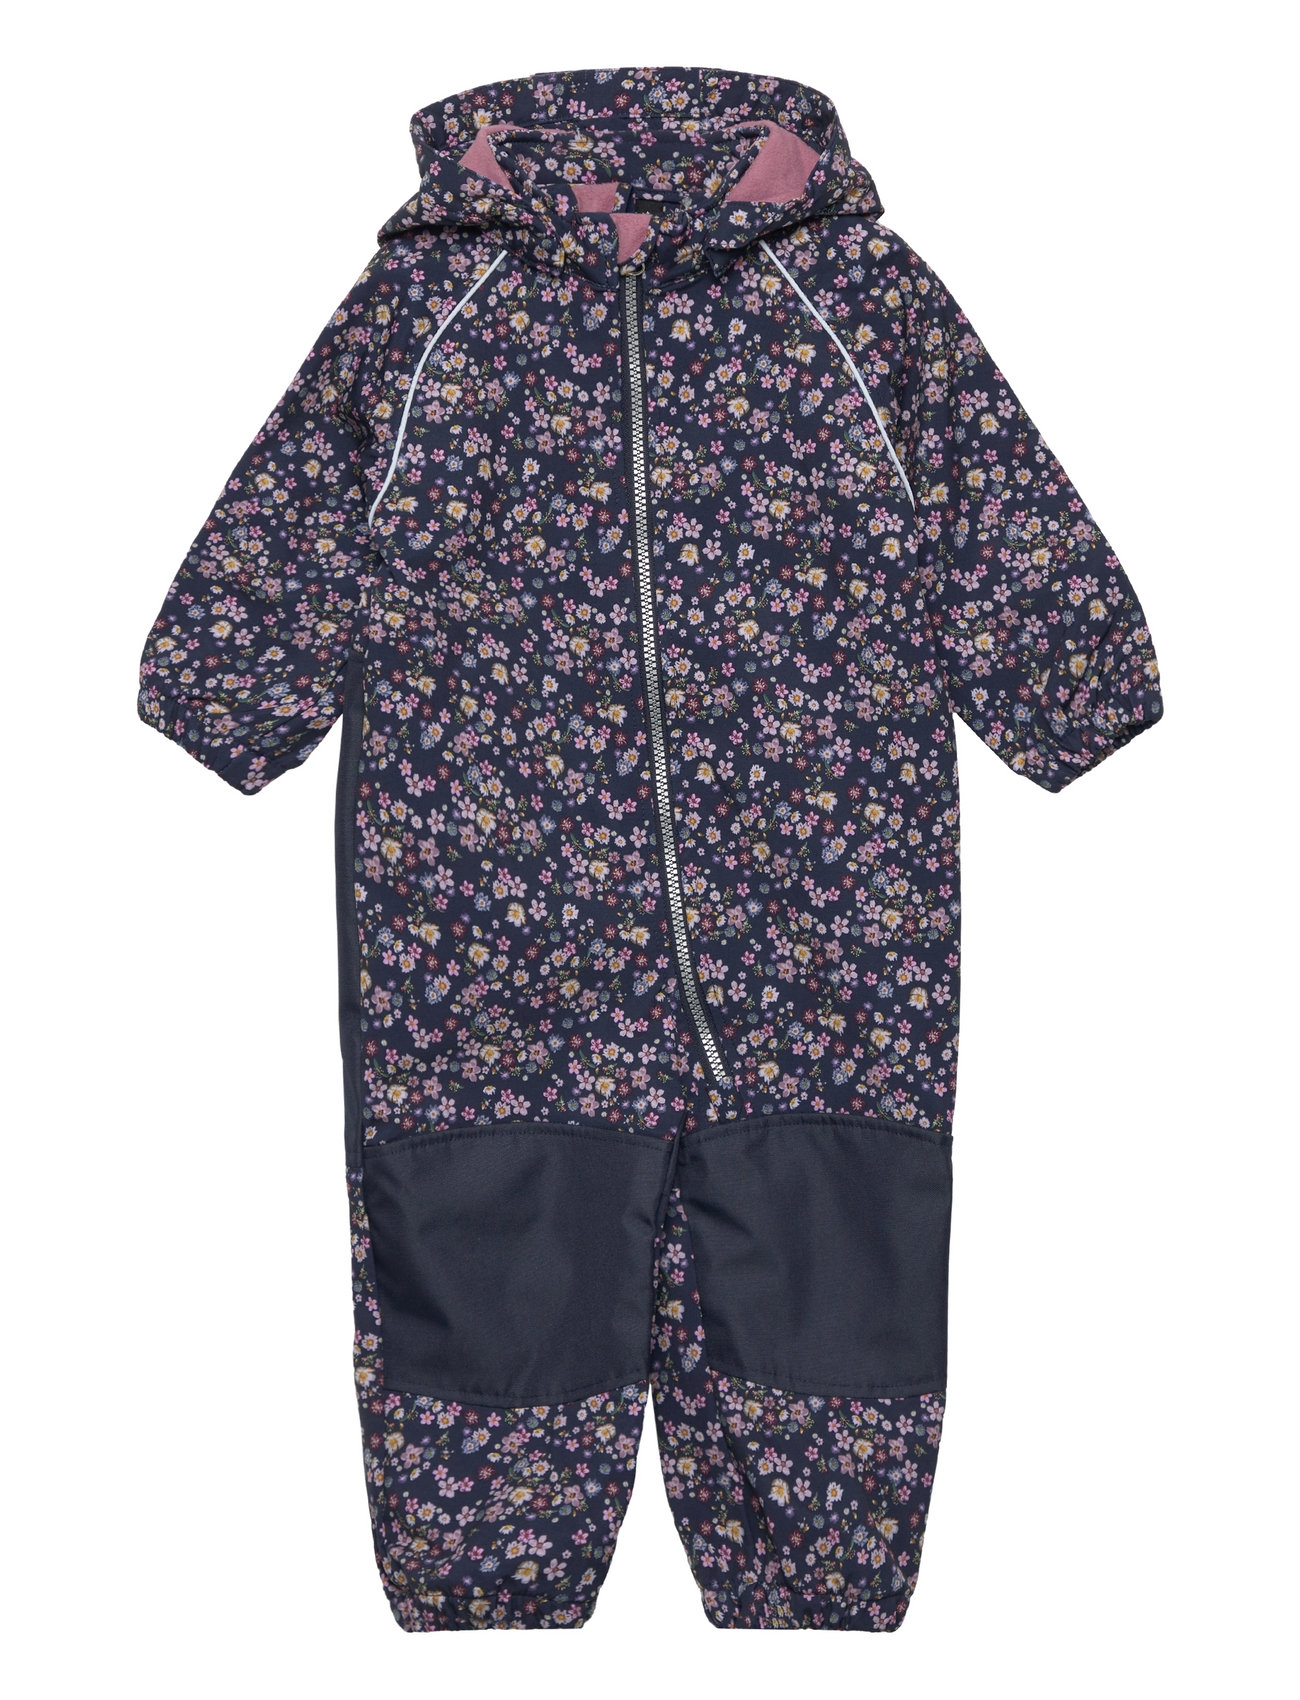 28.50 Fo easy Suit - and it Buy Coveralls name name from Flower Boozt.com. Fast returns it delivery Liberty online at Nmfalfa08 €.